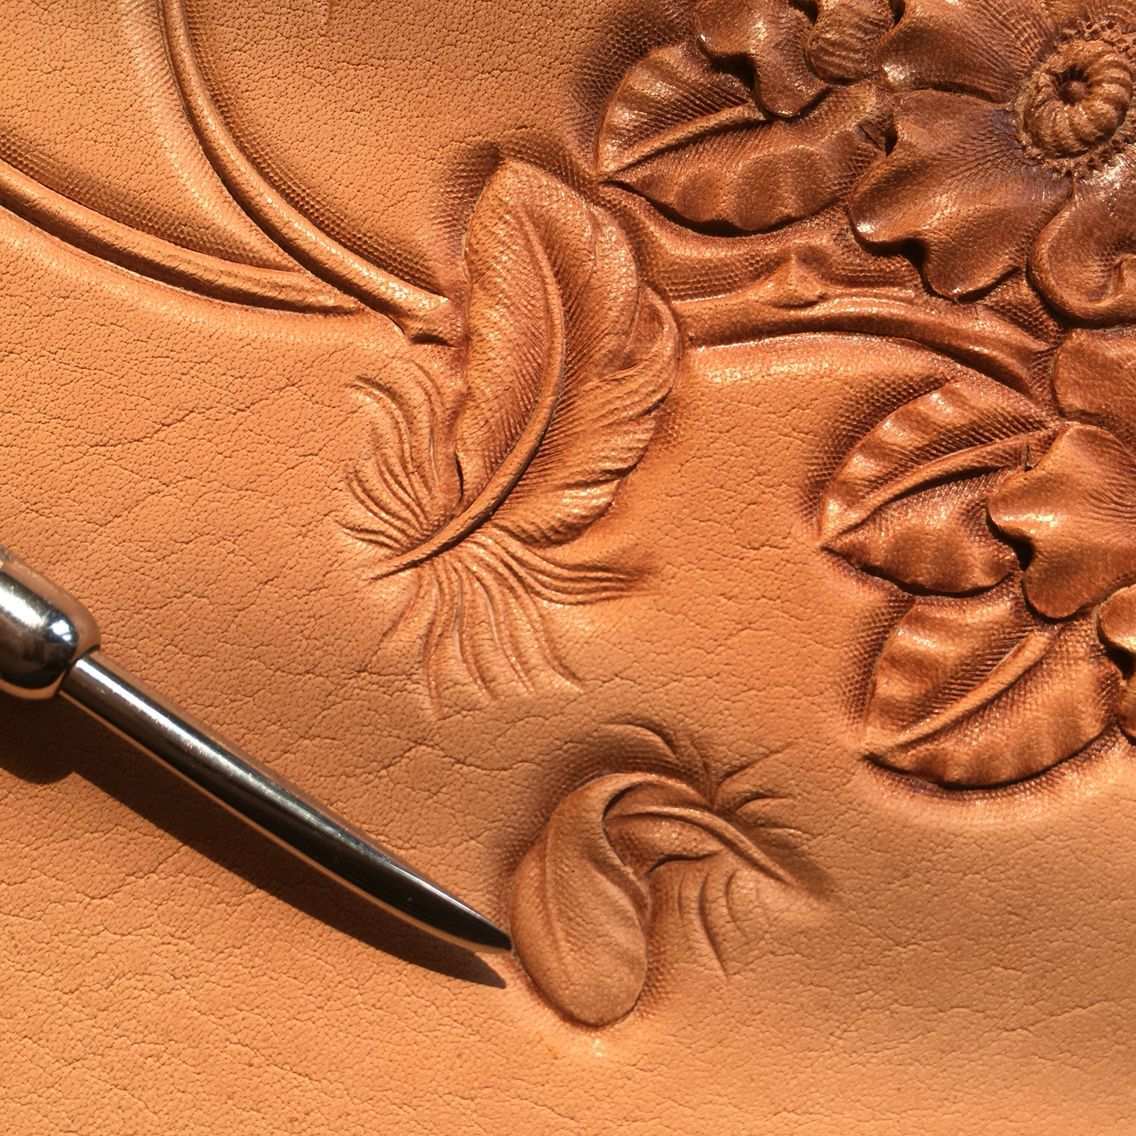 Flowers And Feathers Leather Working Leather Handmade Leather Tooling